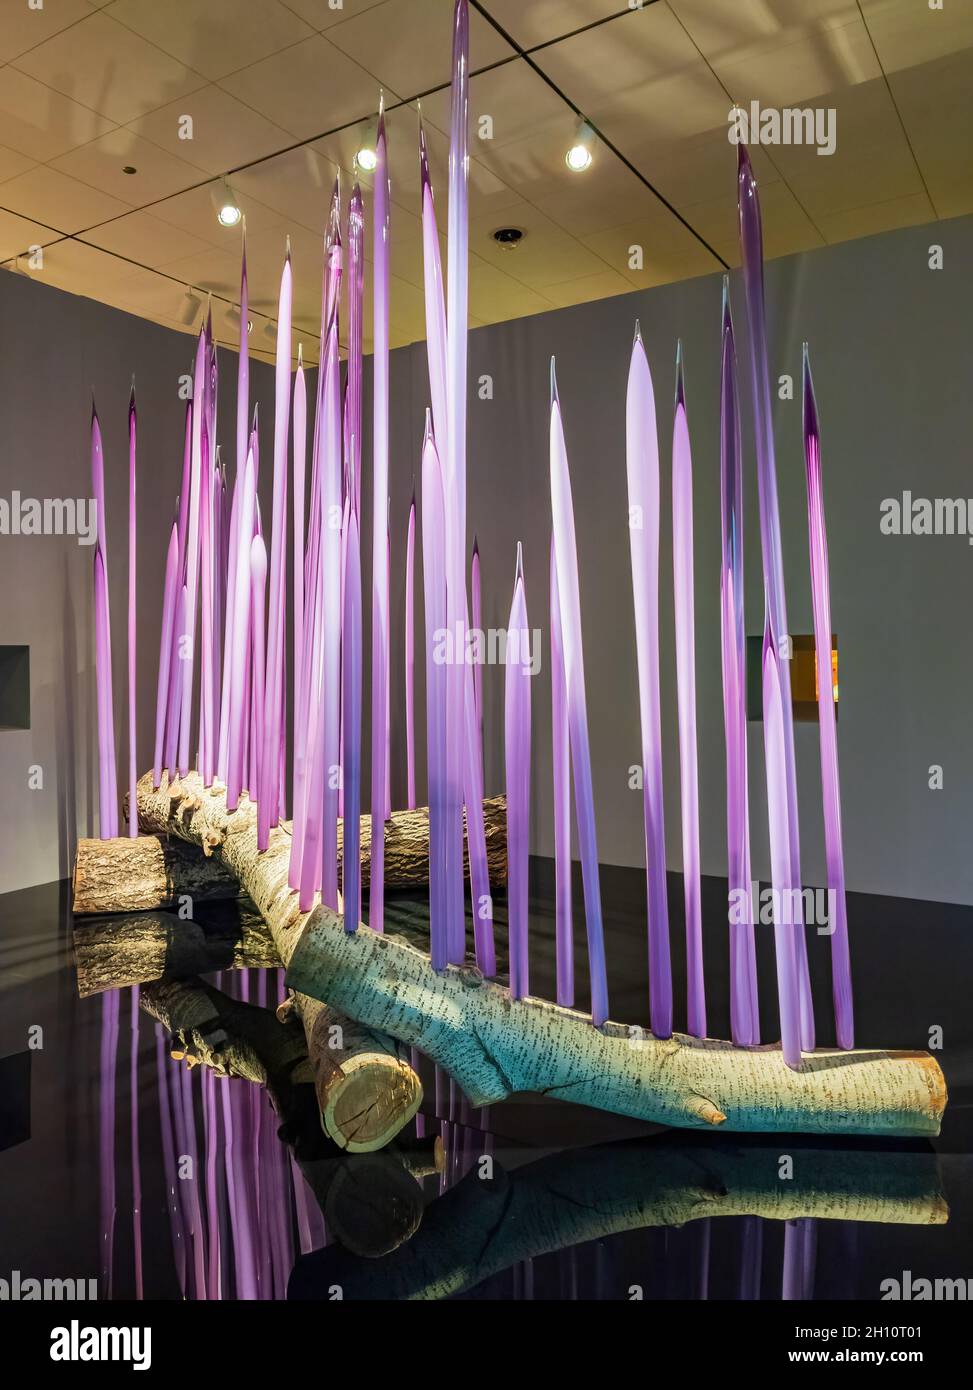 Oklahoma, OCT 2, 2021 - Dale Chihuly, The Collection exhibit in the Oklahoma City Museum of Art Stock Photo